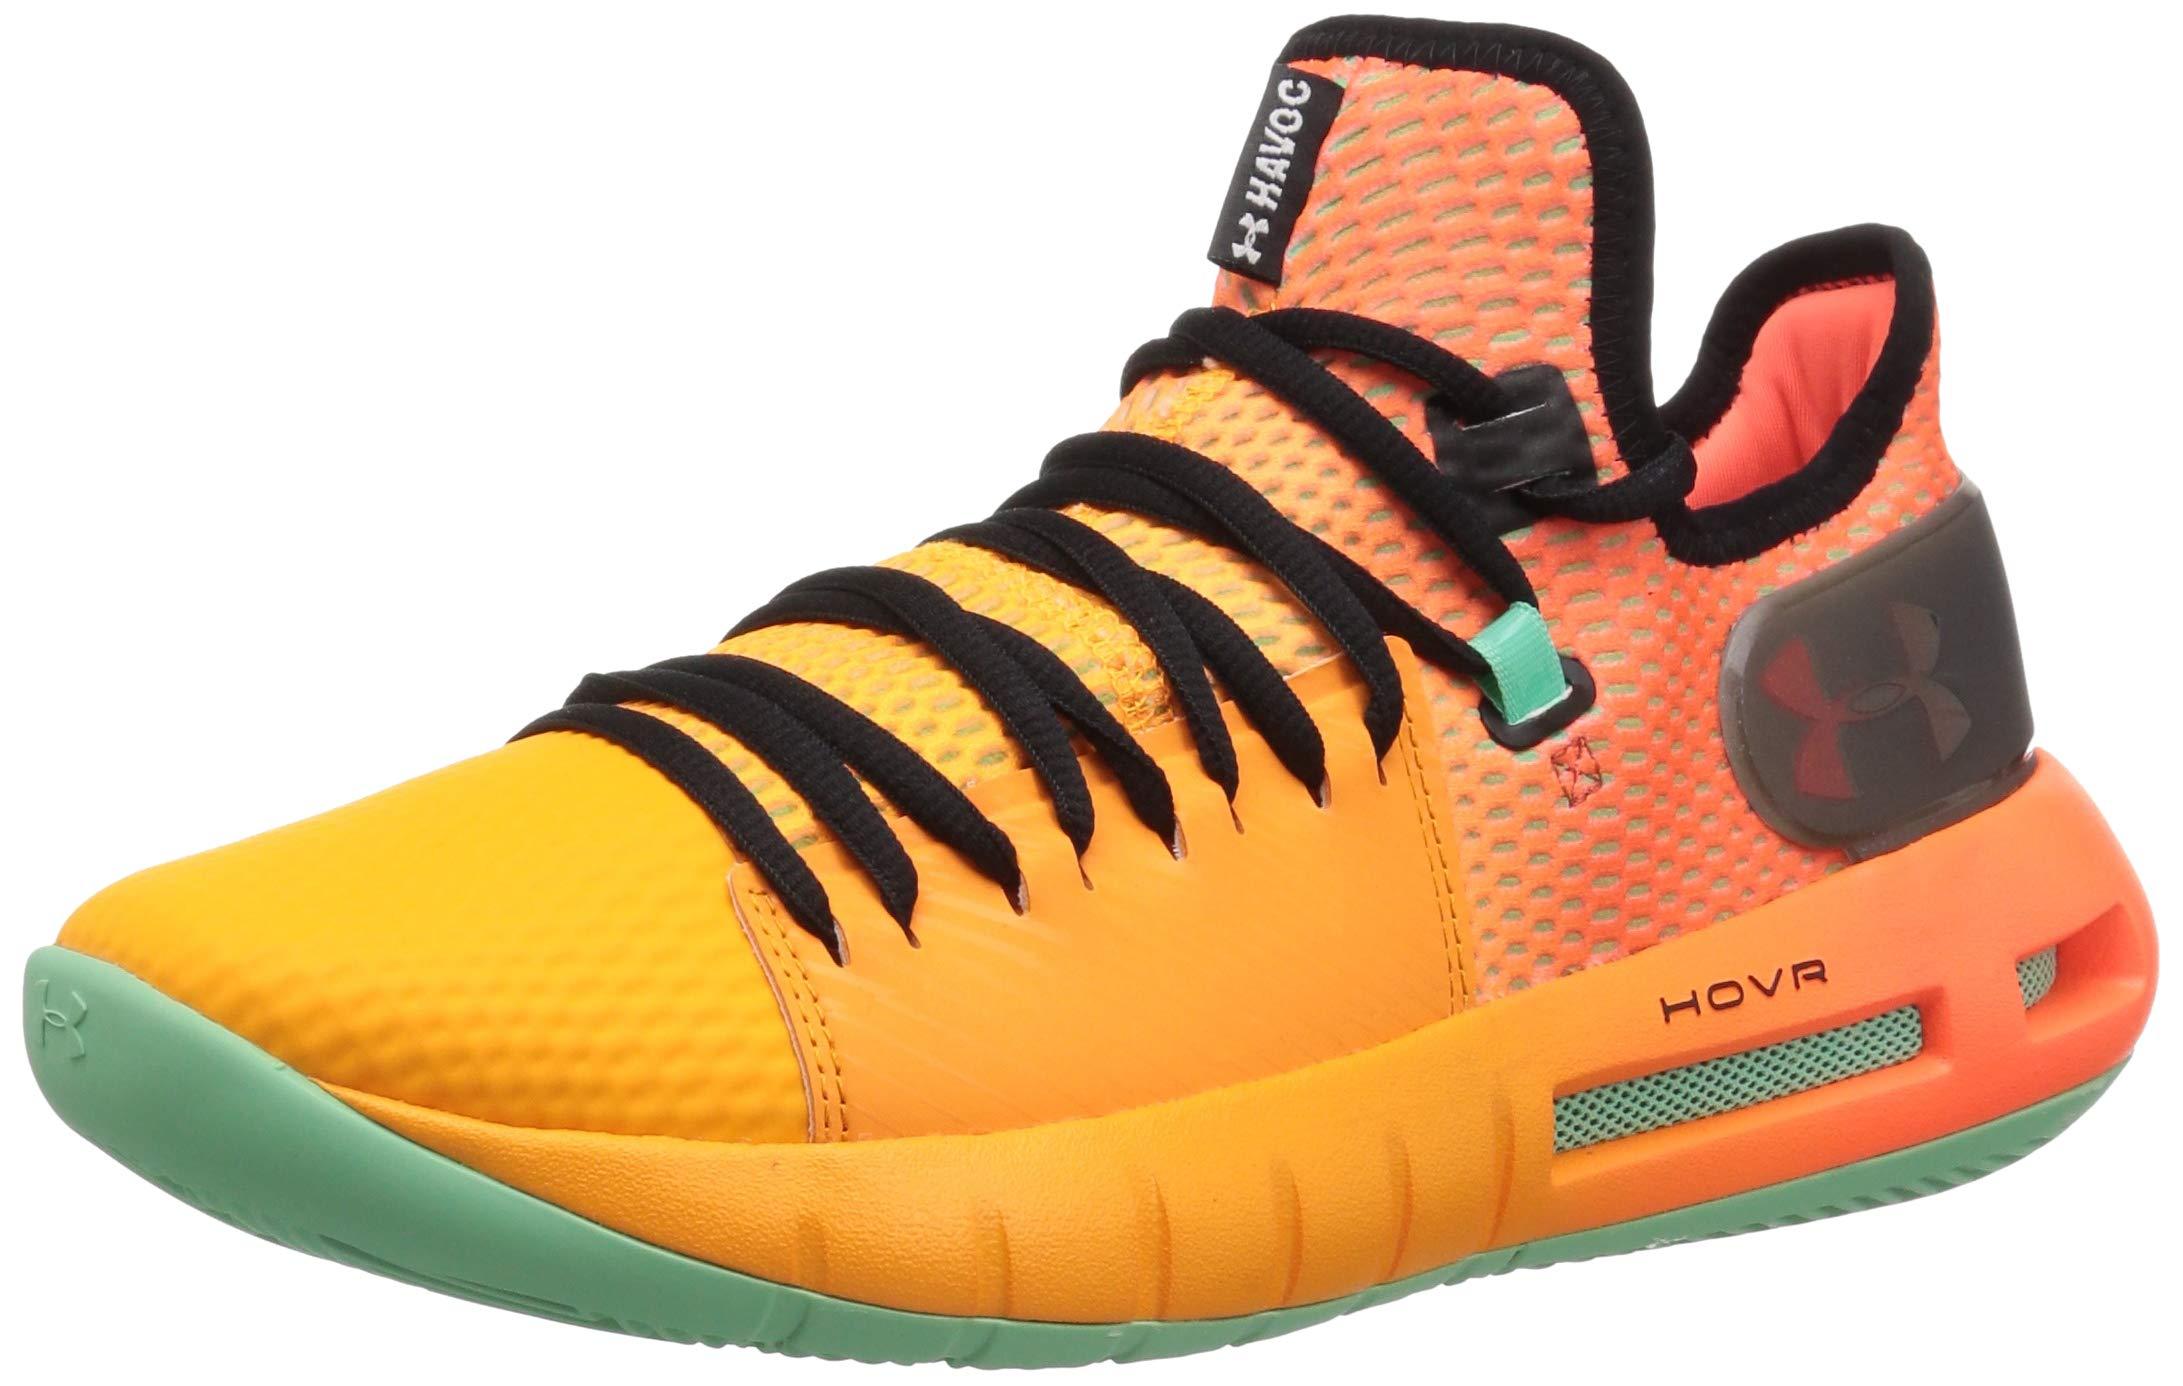 Under Armour Drive 5 Low Basketball 